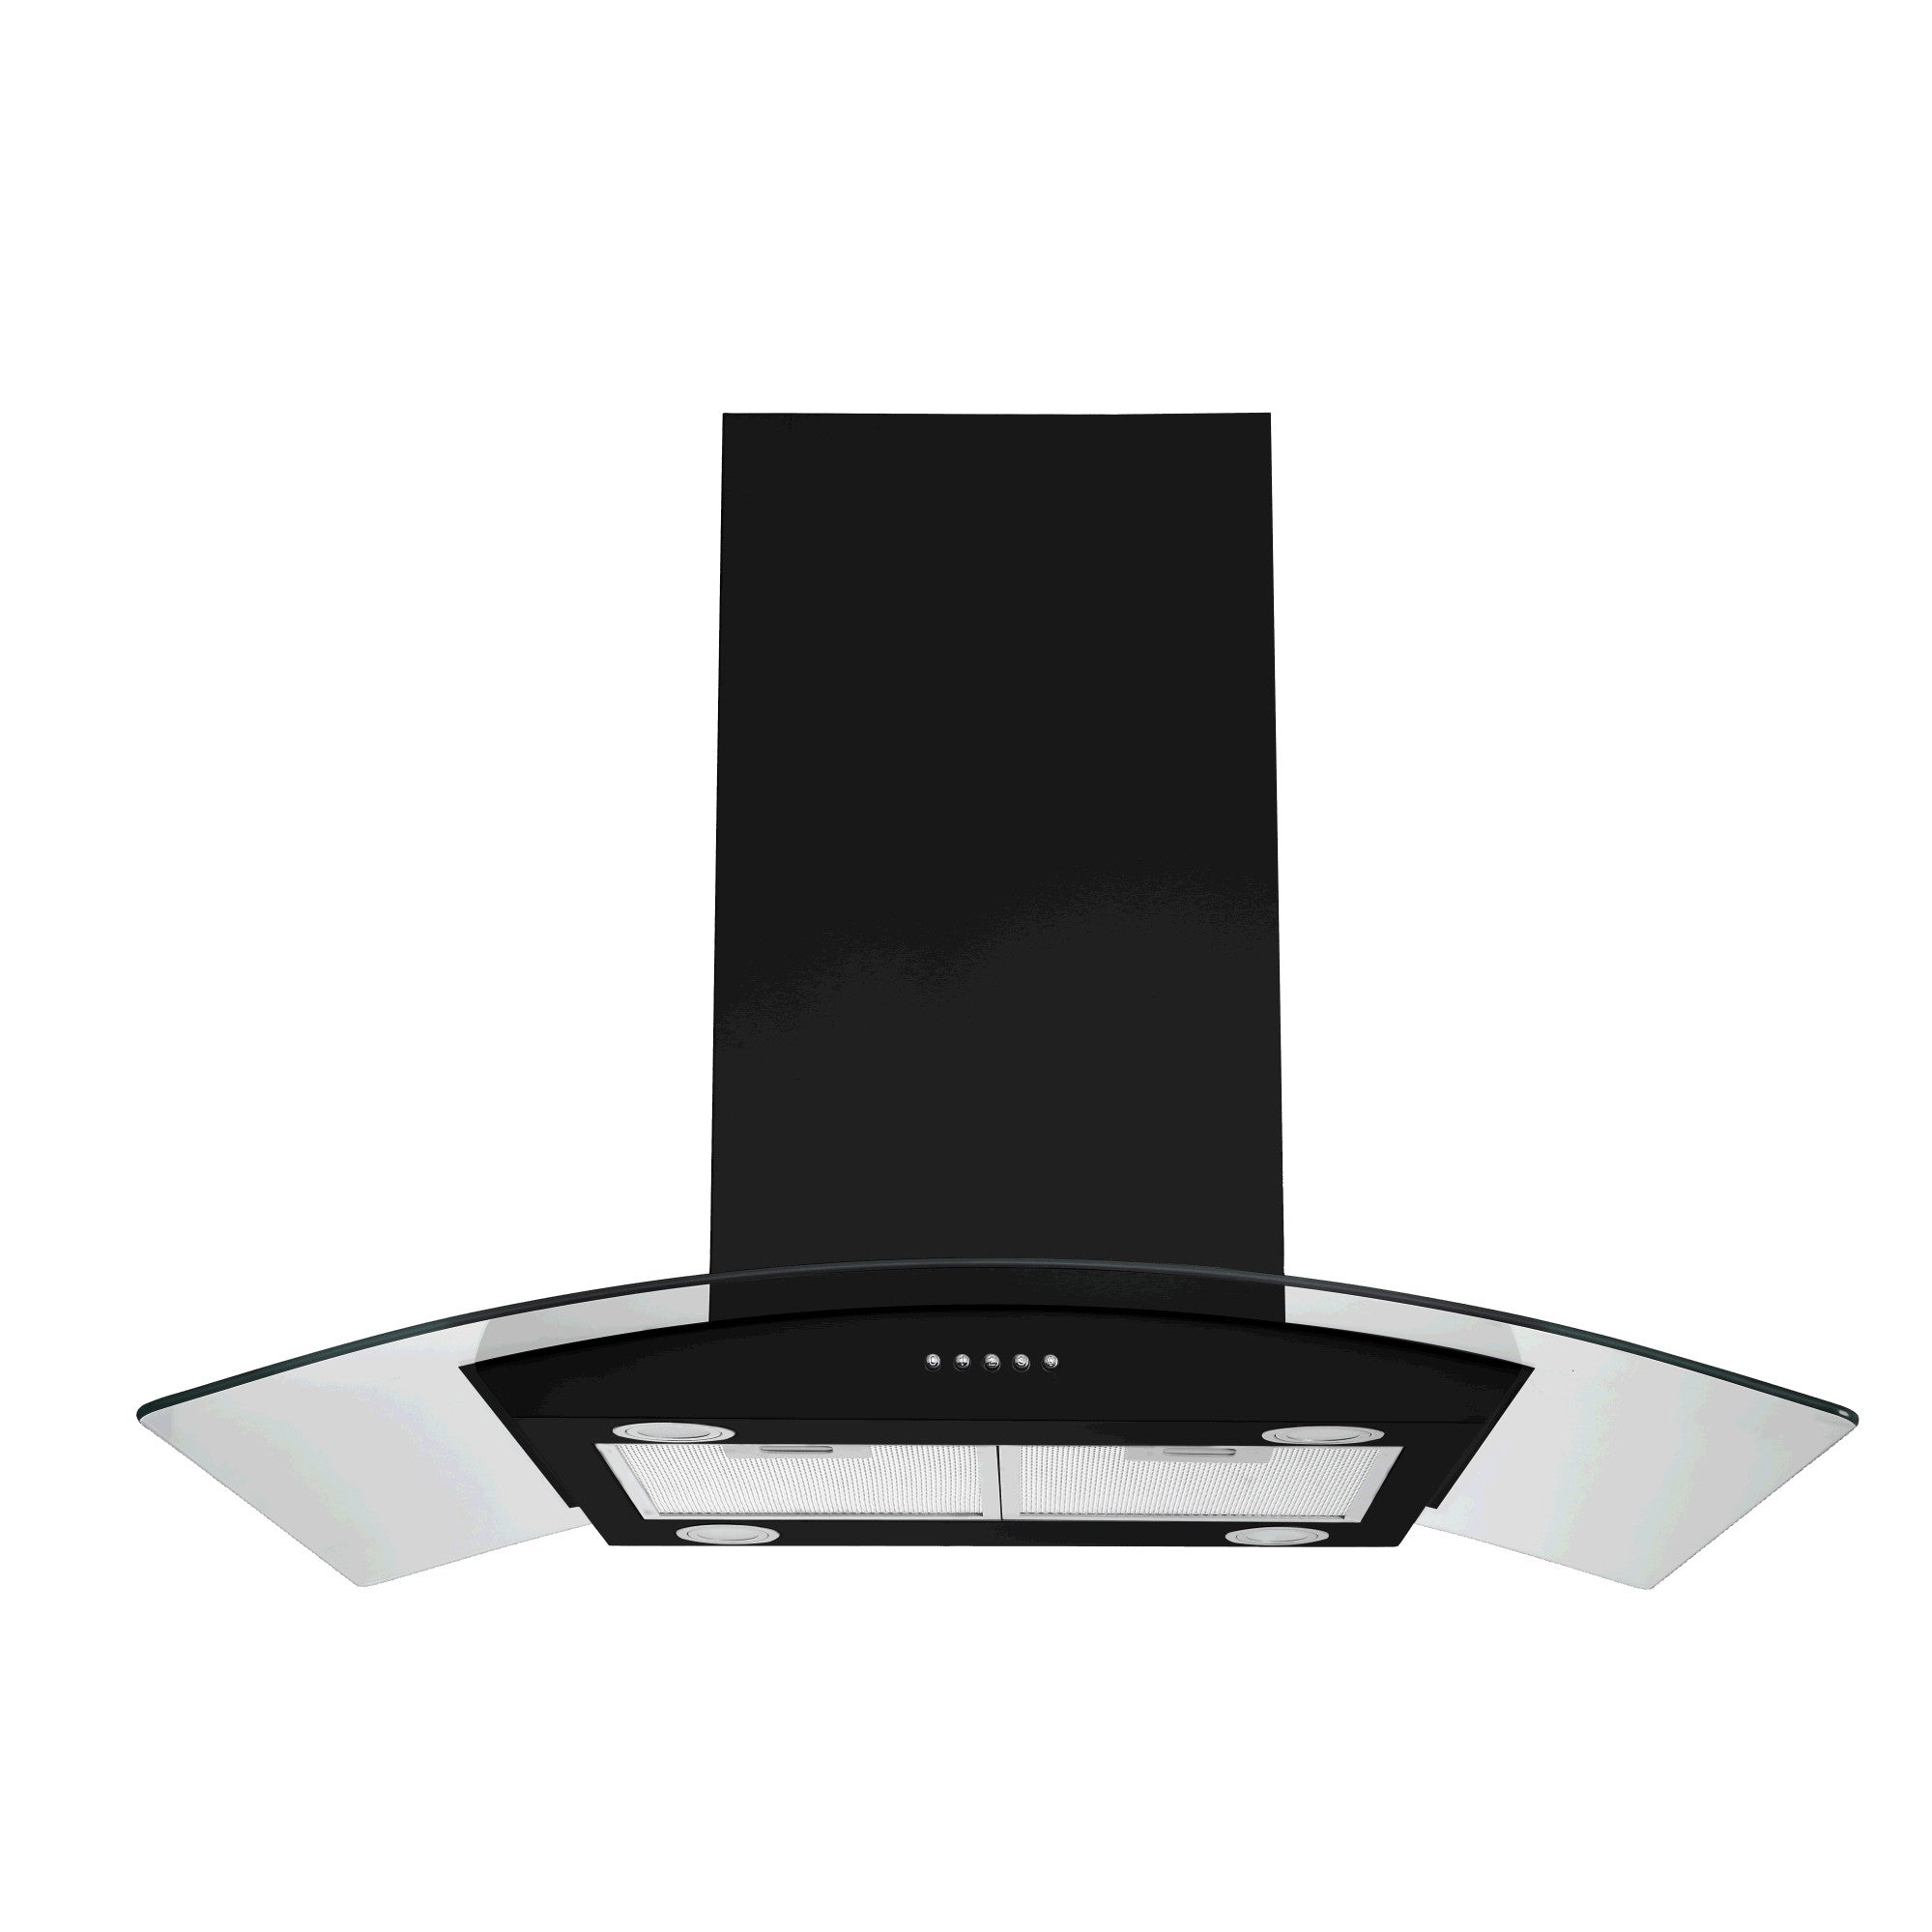 Ducted Stainless Steel Kitchen Island Range Hood Tempered Glass 3 Speed Black